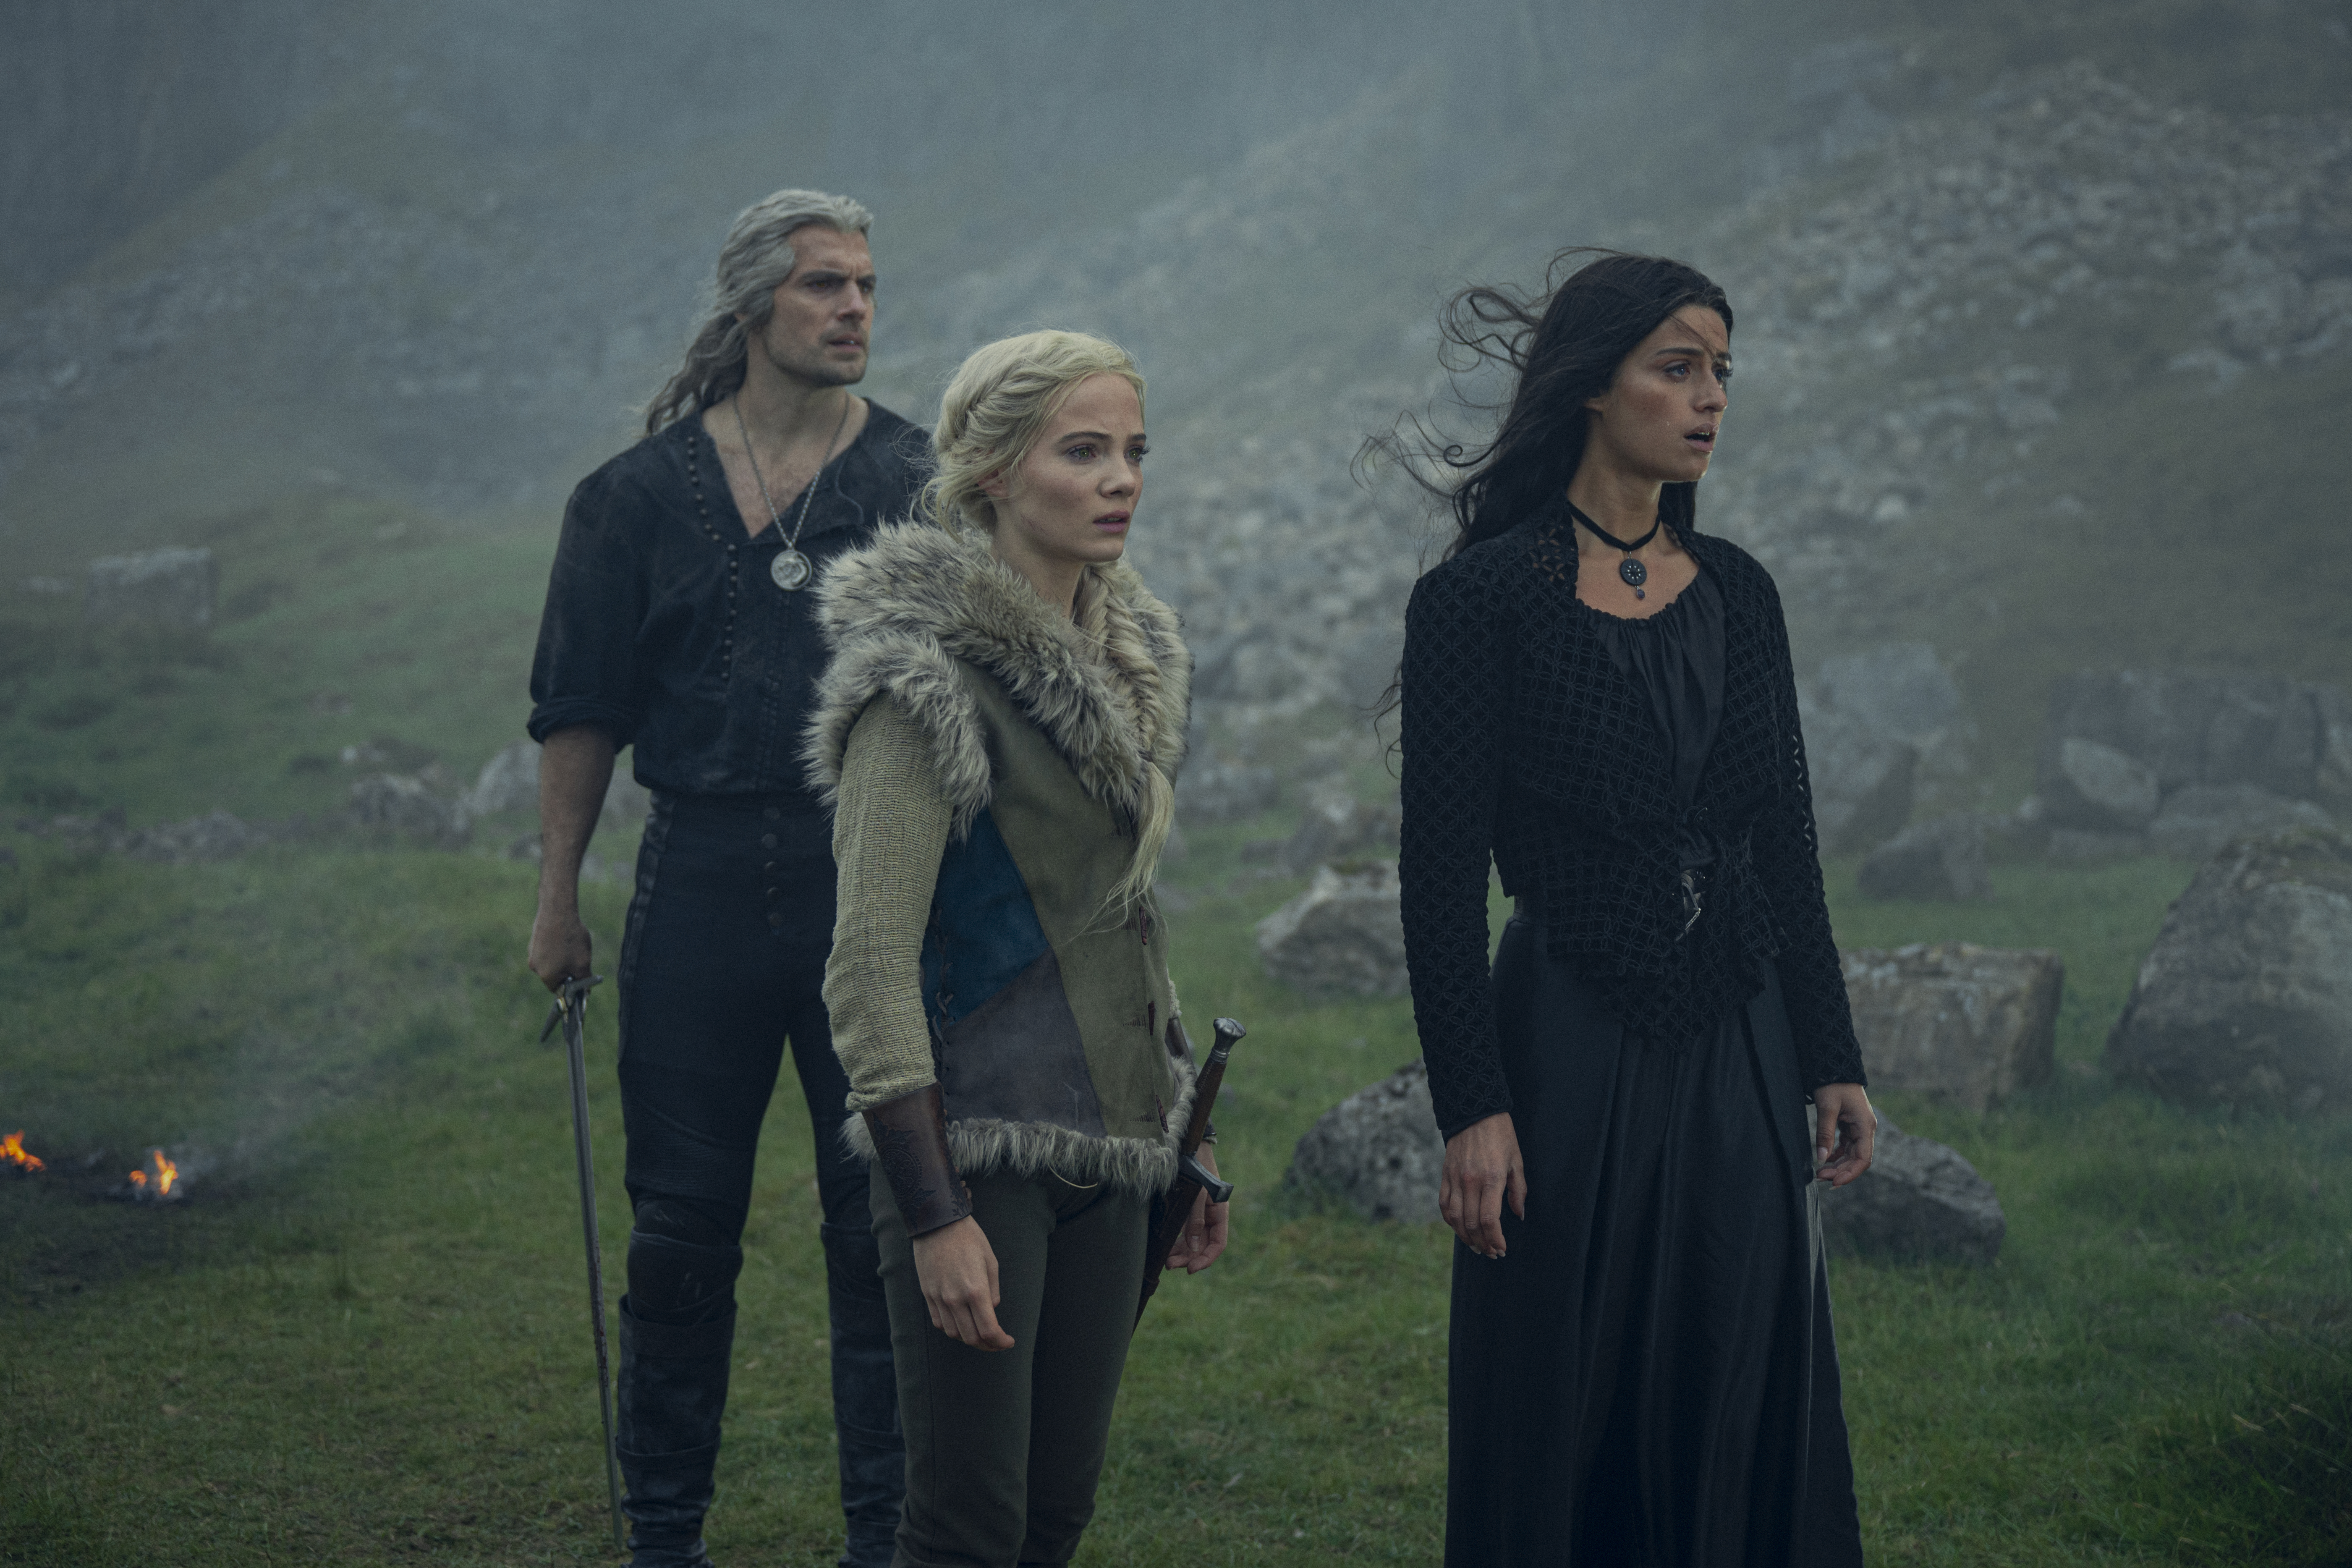 Geralt, Ciri and Yennefer stand in a rocky field in season 3 of The Witcher